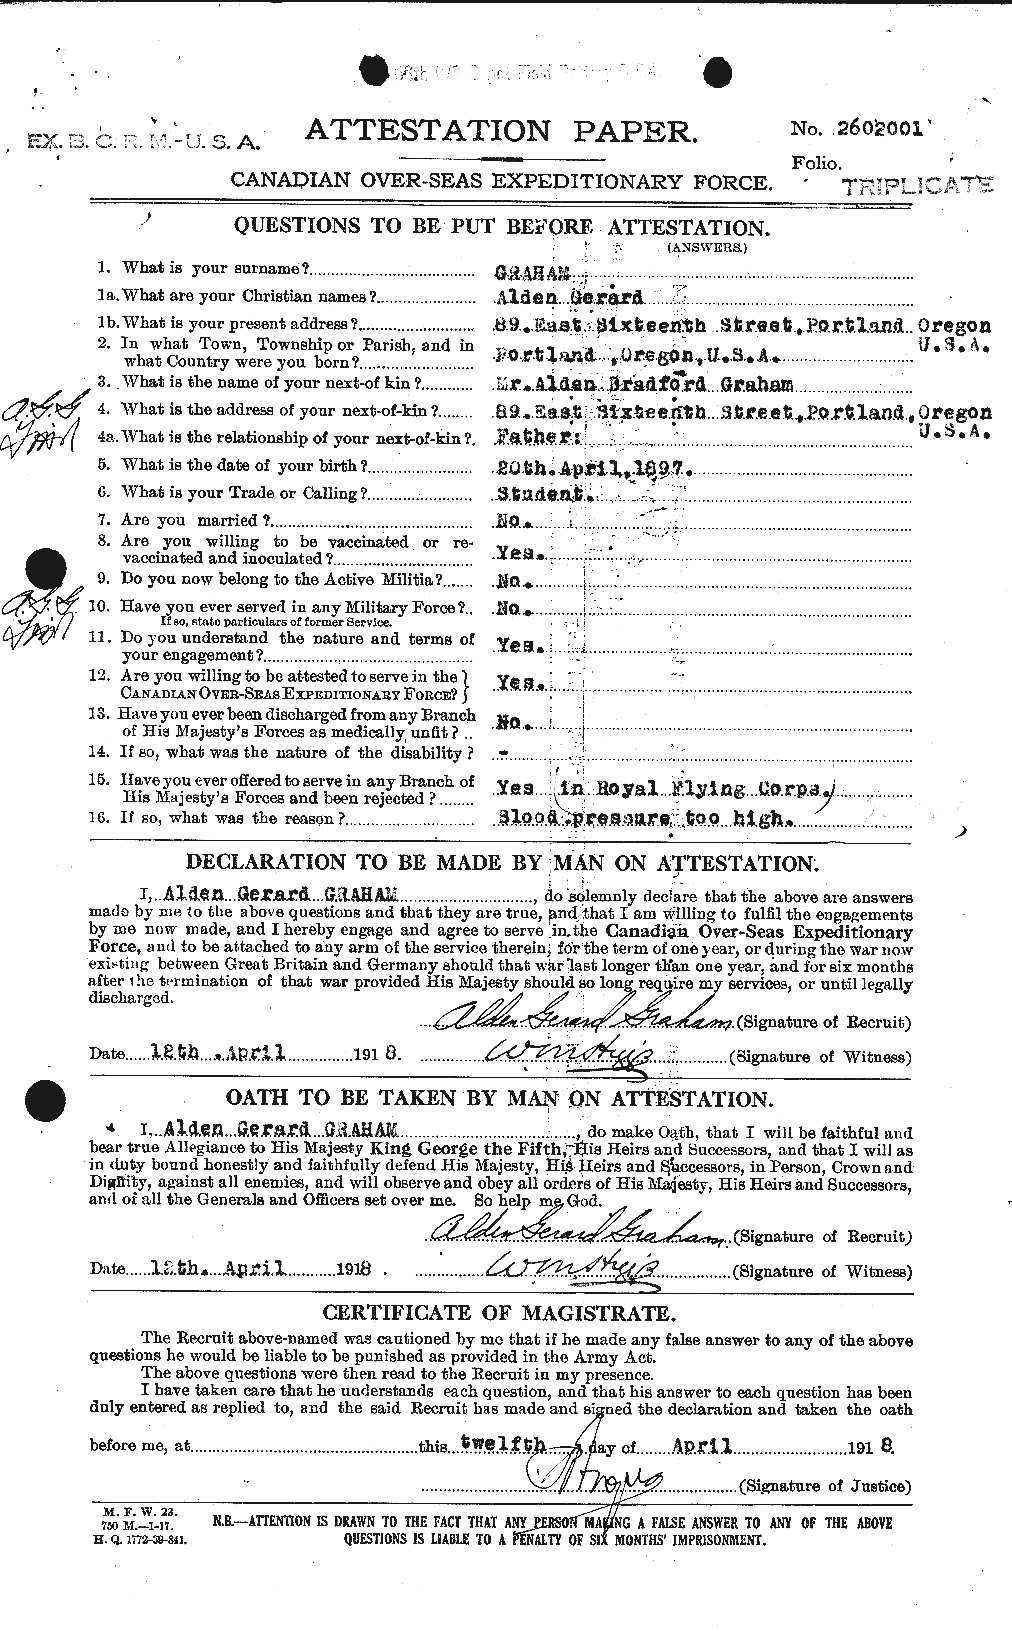 Personnel Records of the First World War - CEF 359572a